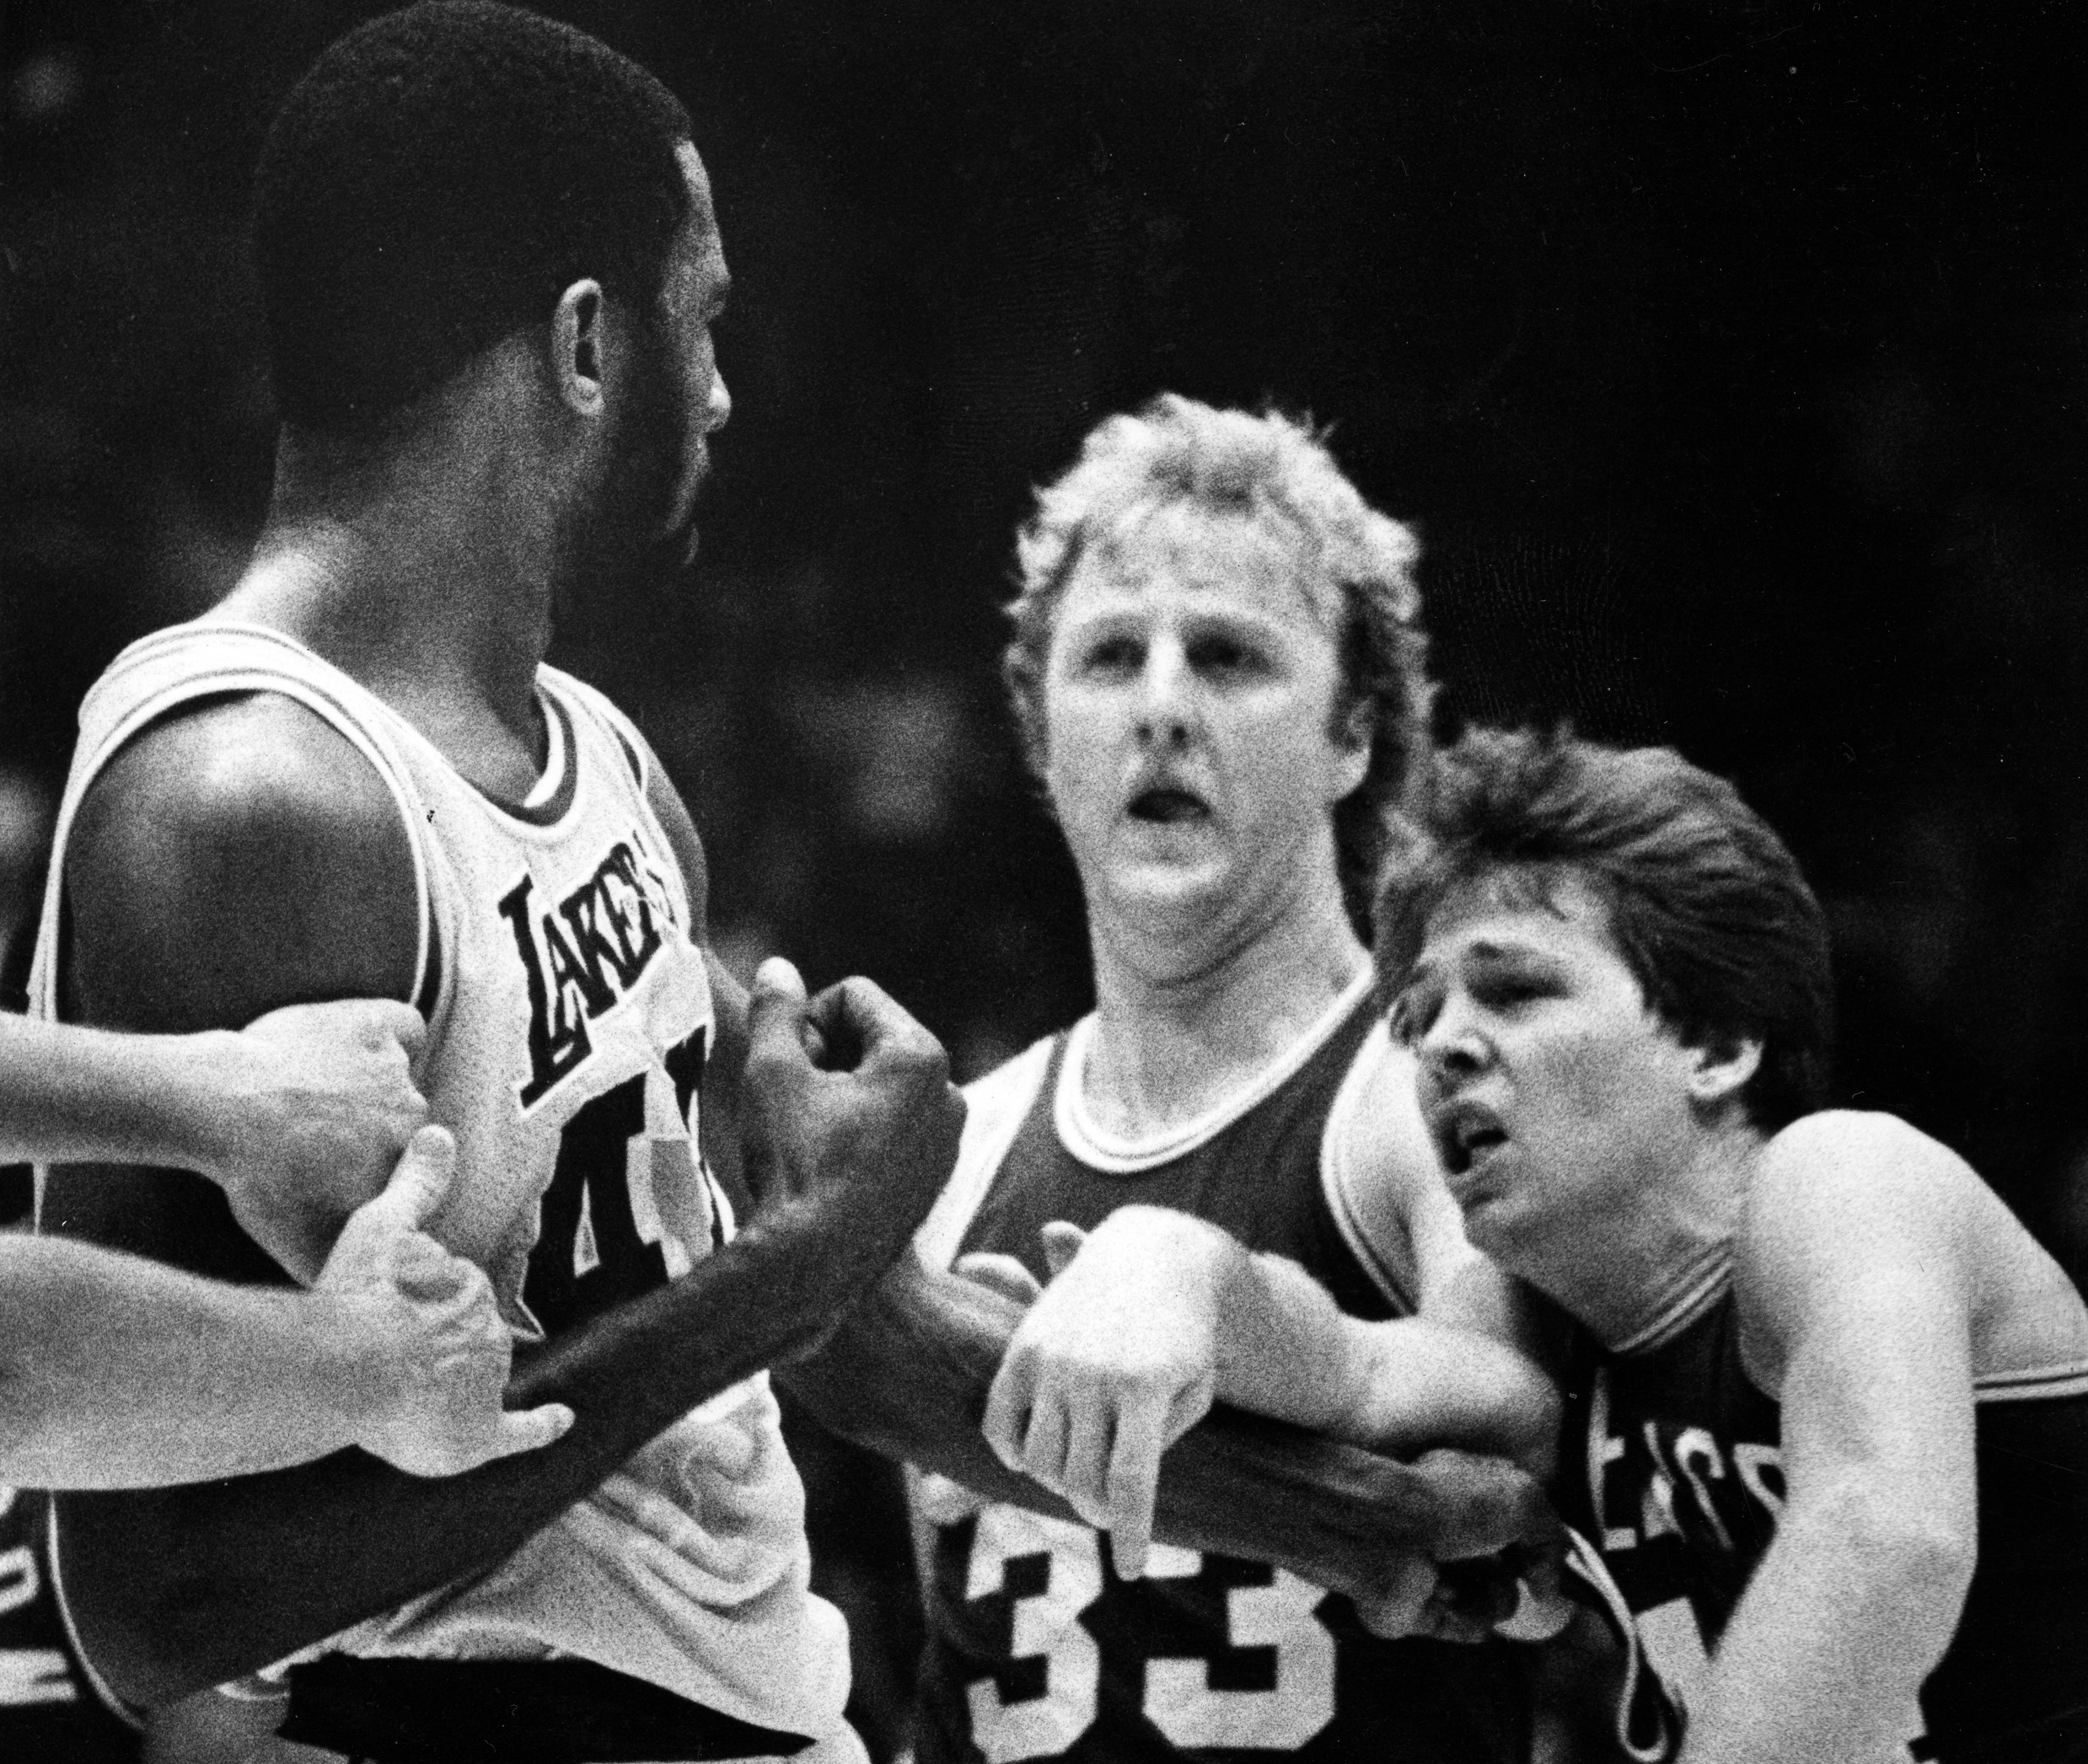 A scuffle erupts between Boston Celtics guard Danny Ainge, right, and Lakers forward James Worthy as Boston's Larry Bird steps in between.